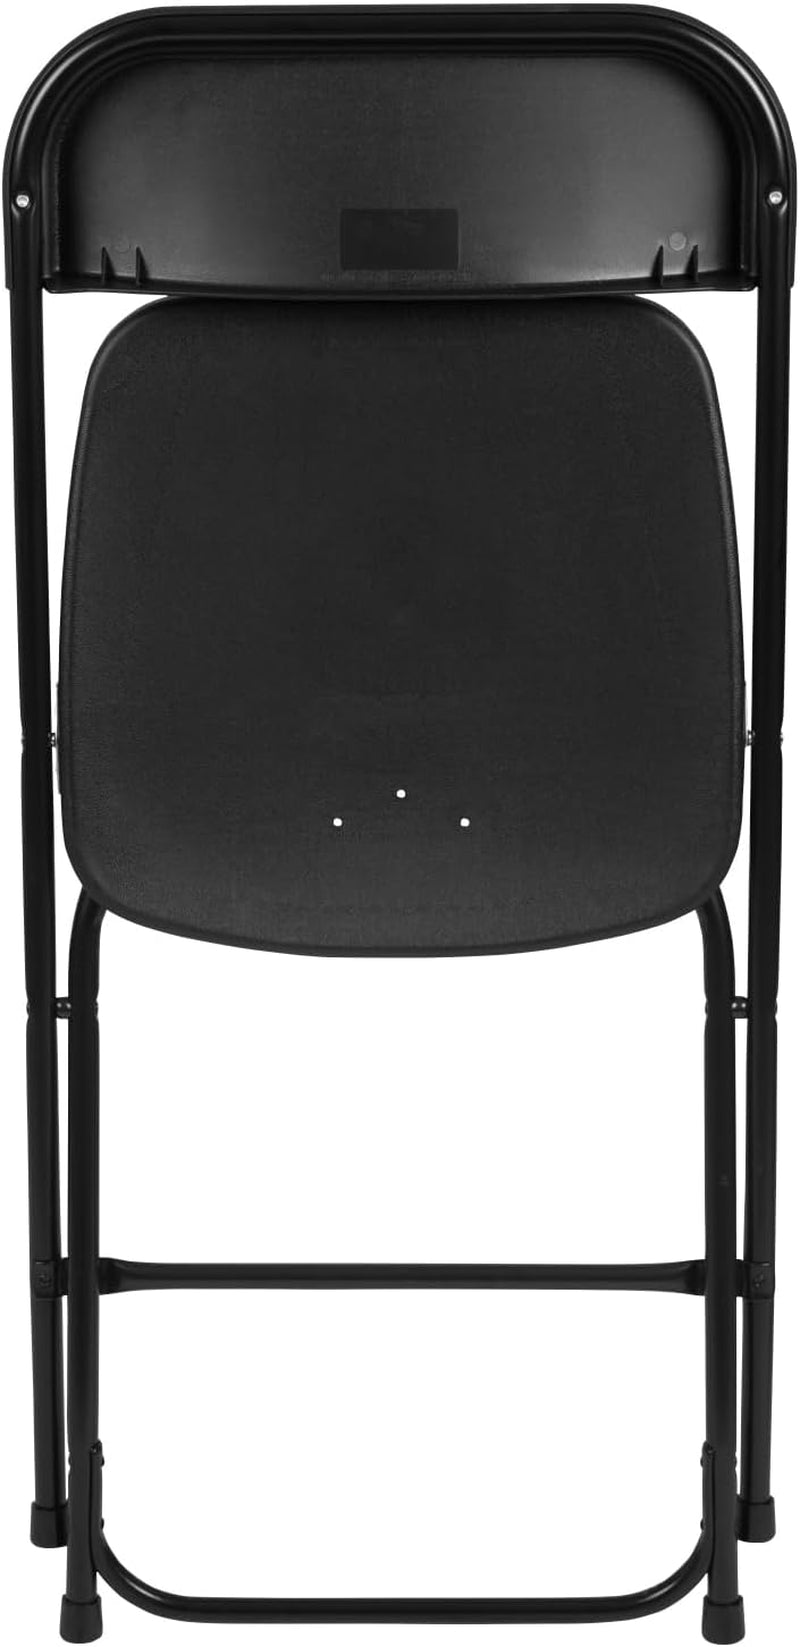 Hercules Series Plastic Folding Chair - Black - 10 Pack 650LB Weight Capacity Comfortable Event Chair-Lightweight Folding Chair